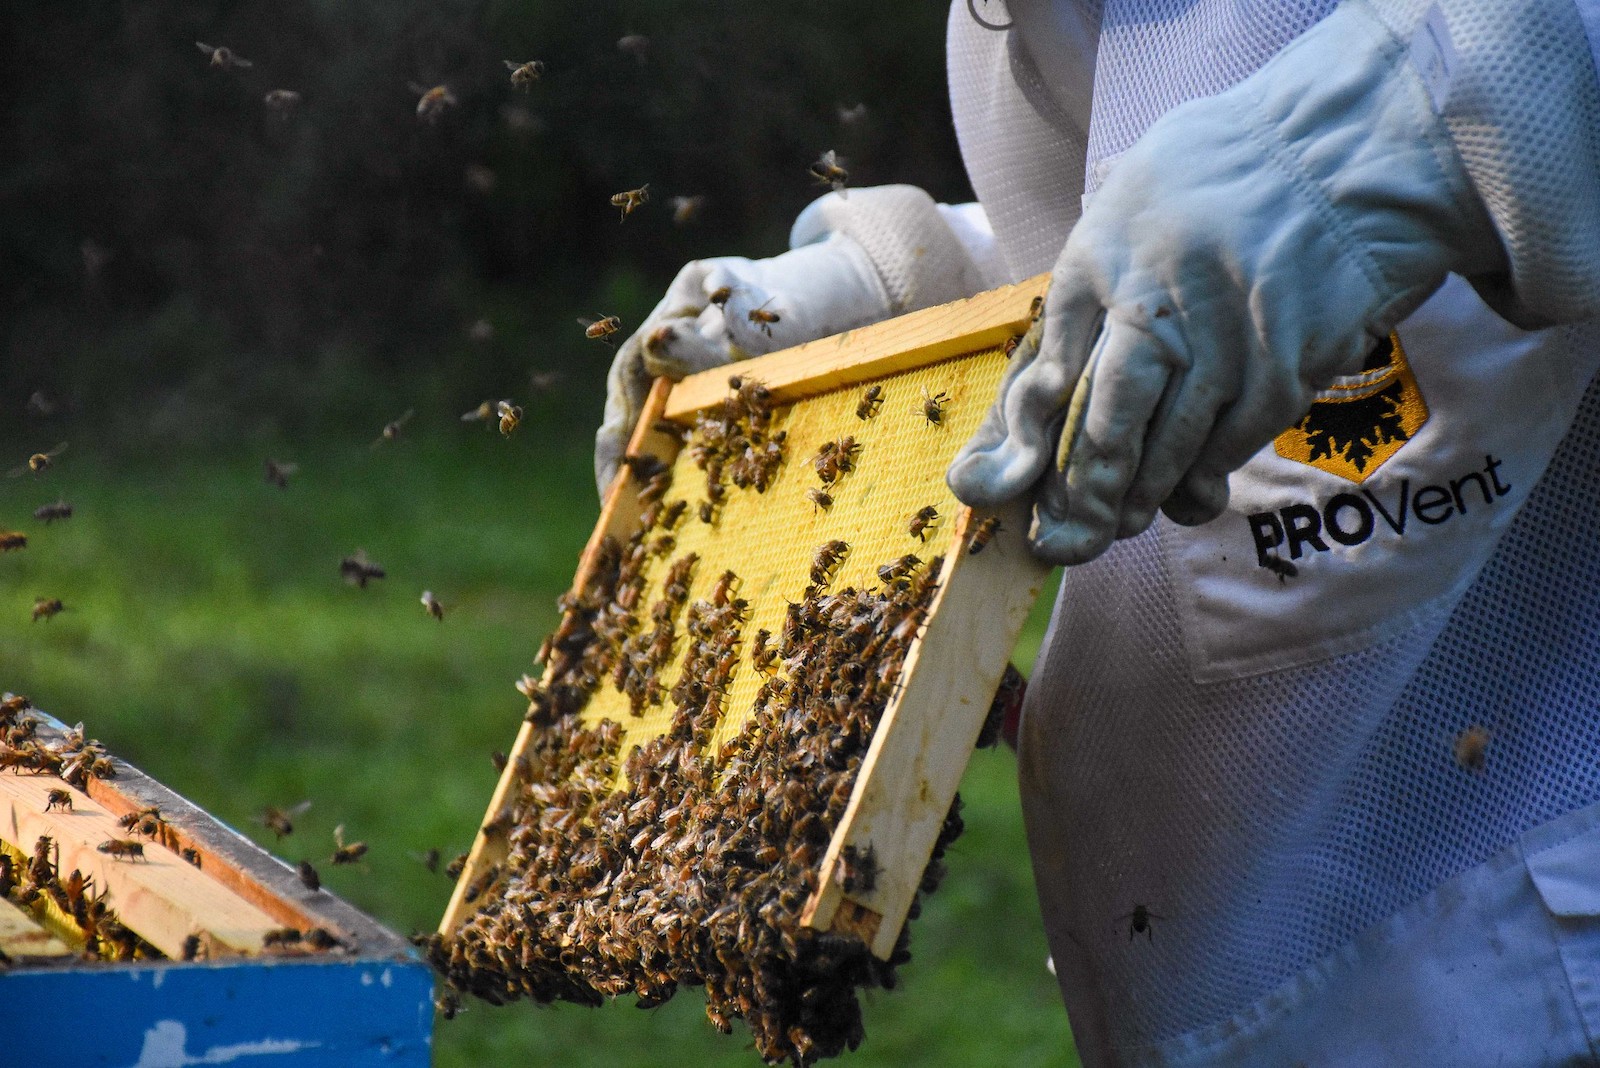 a person in a white bulky bee suit pulls out a frame from a beehive with two hands. bees cover the frame and fly around the hive